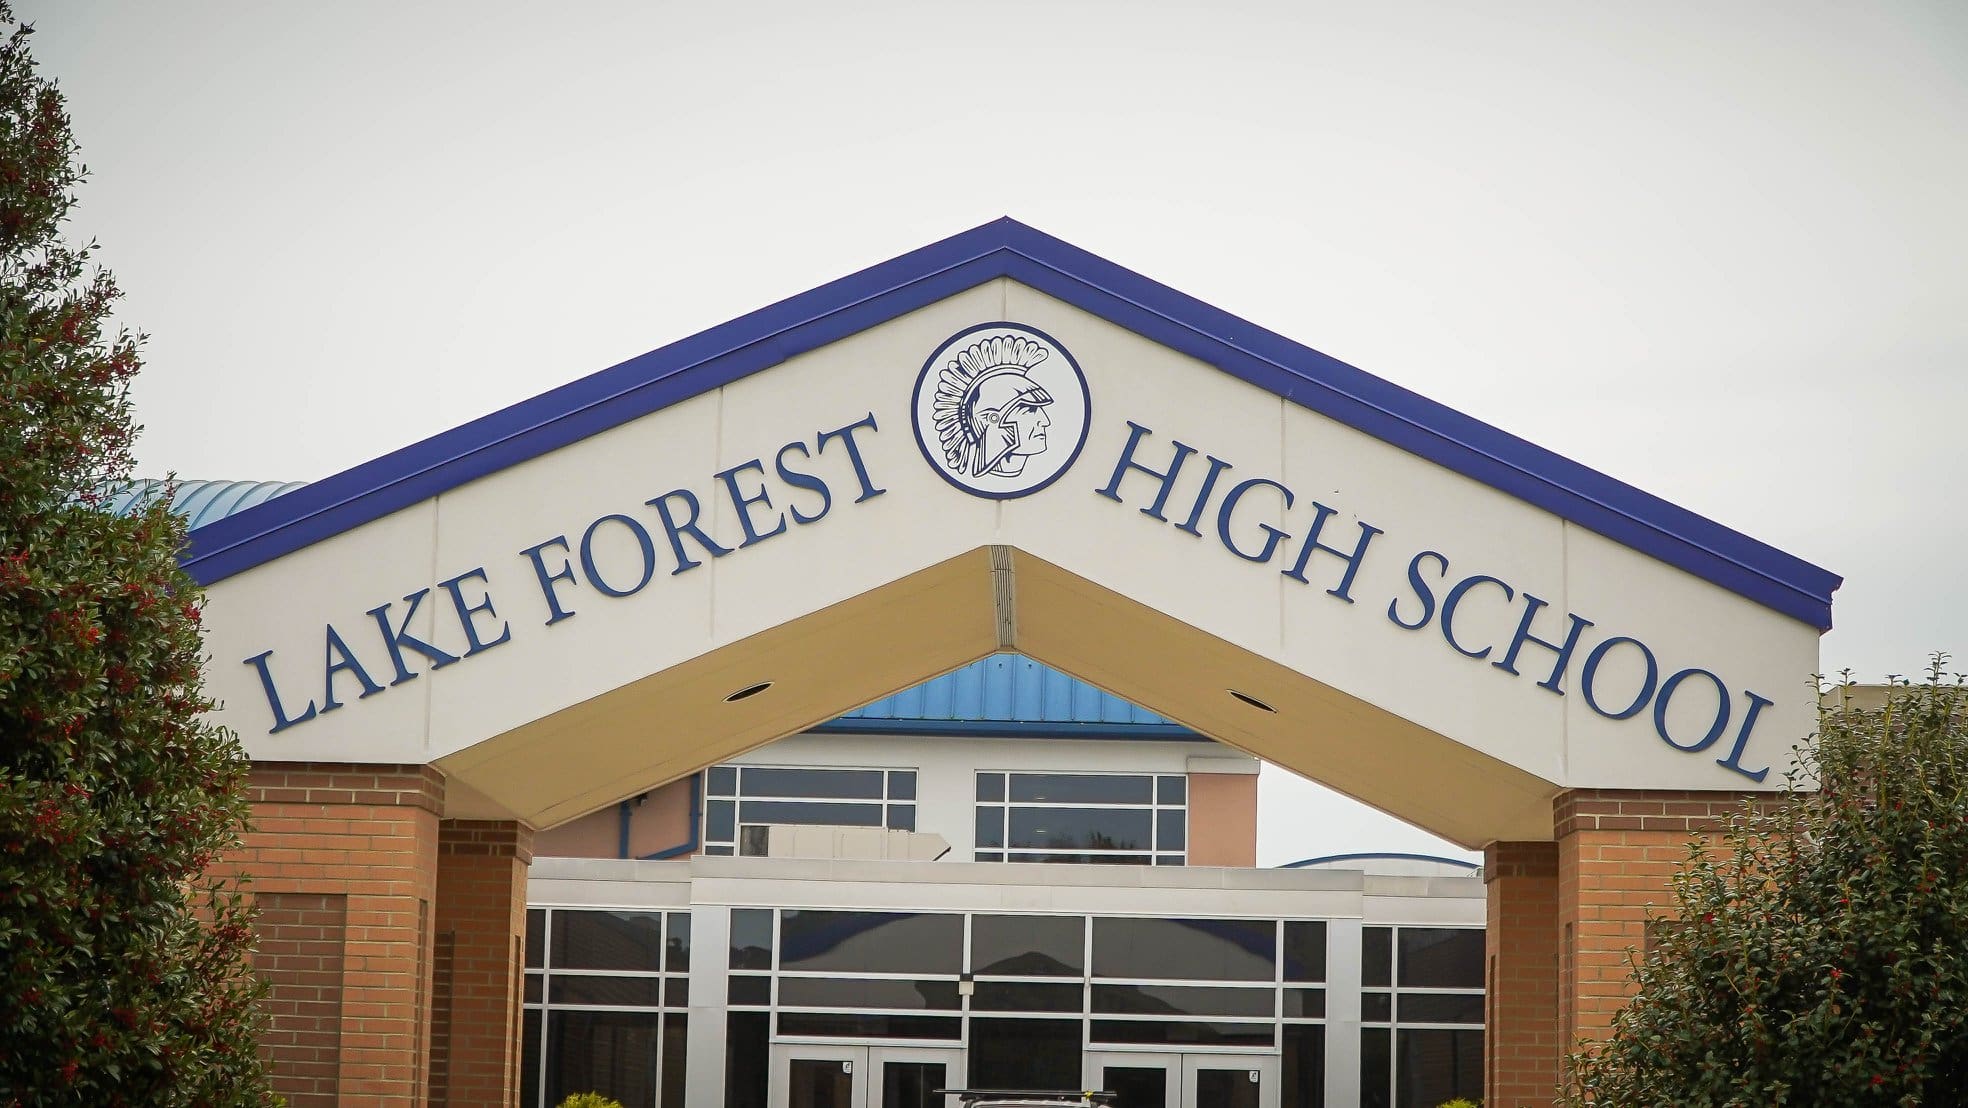 Lake Forest's referendum is Saturday, May 6.